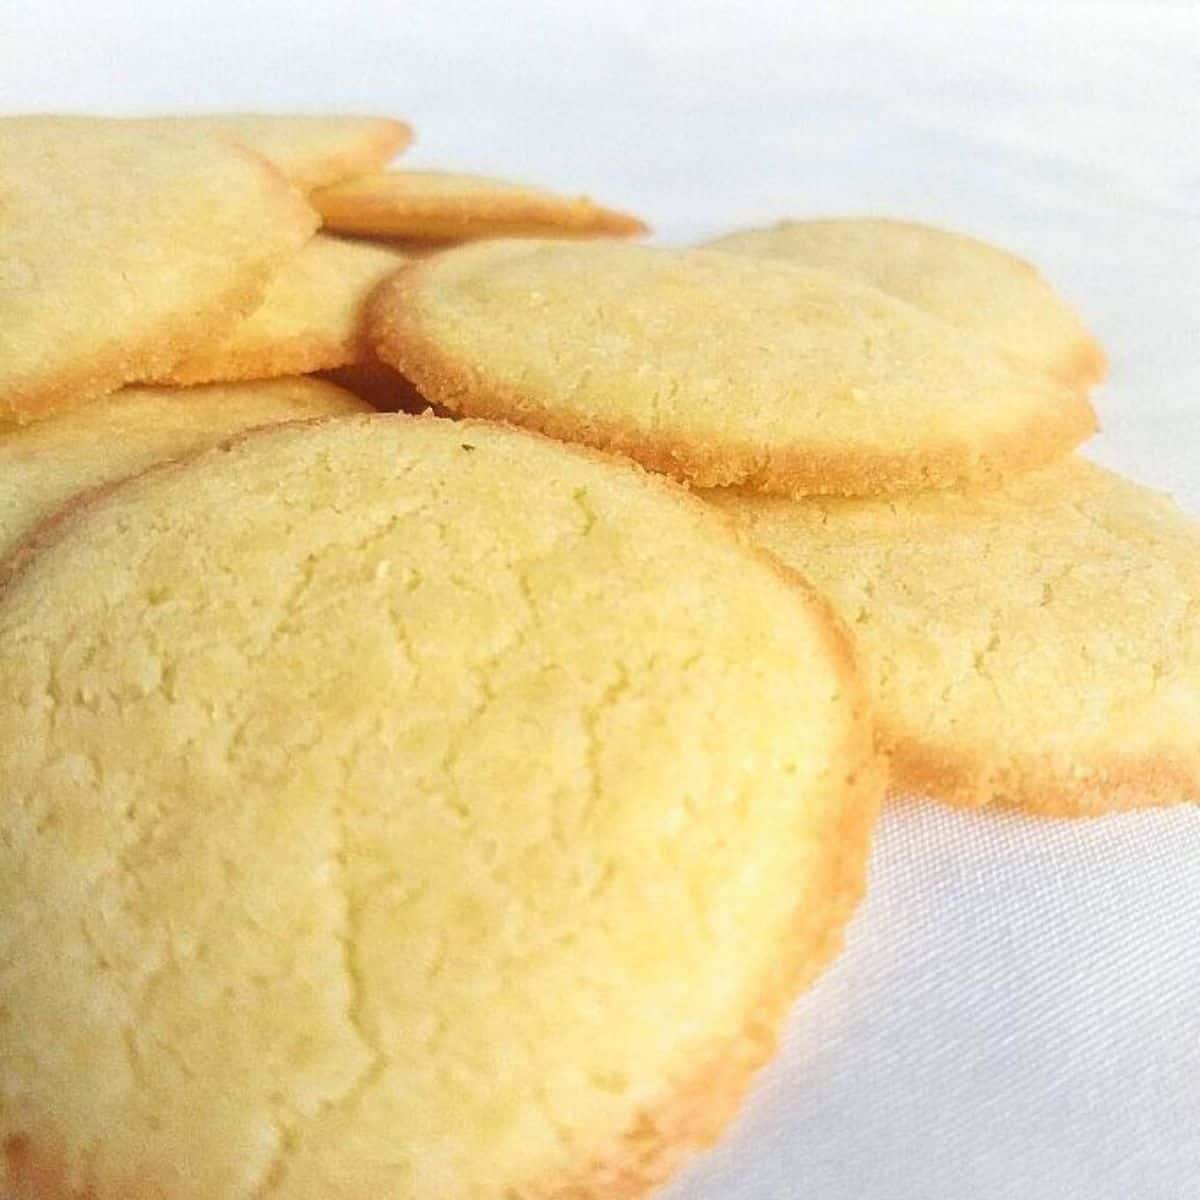 Keto Butter Cookies - Keto Coconut Flour Butter Cookies (1.5 total carbs)